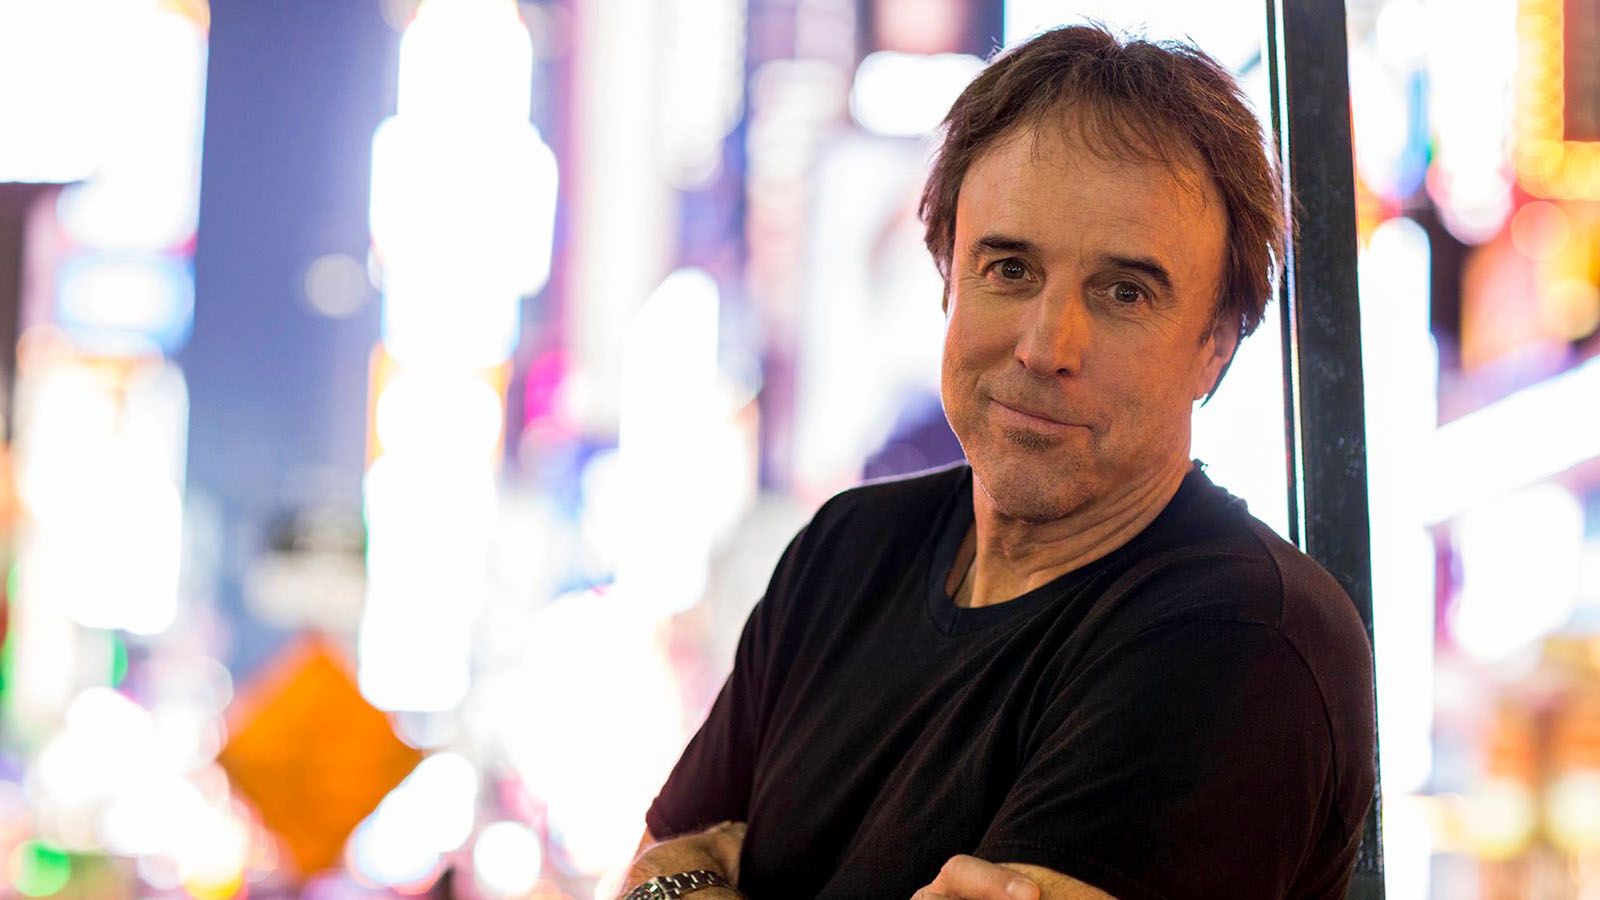 Comedian Kevin Nealon will be at The Clyde on April 6.